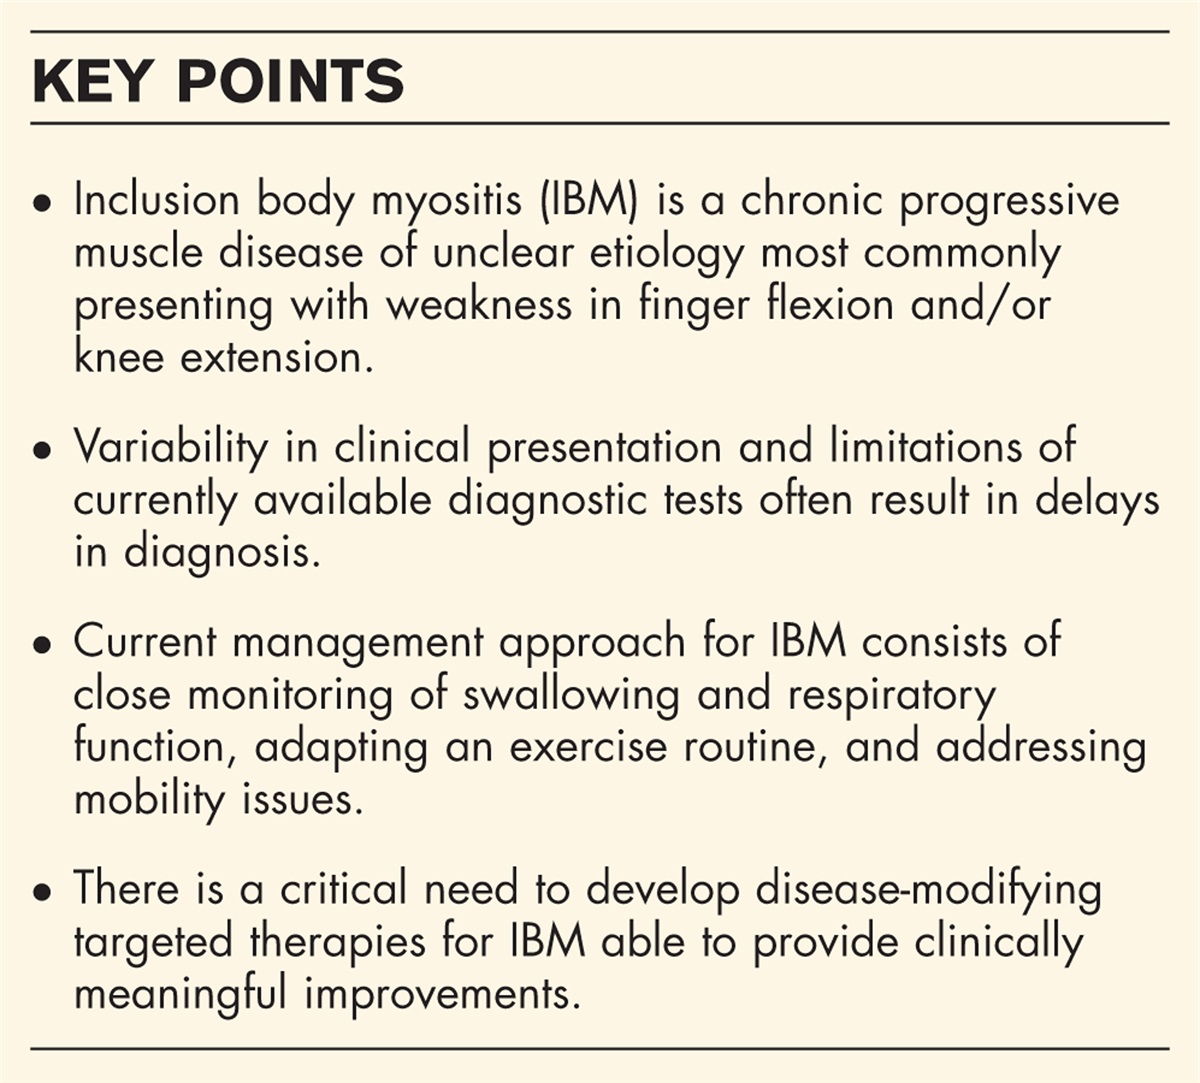 Exploring challenges in the management and treatment of inclusion body myositis